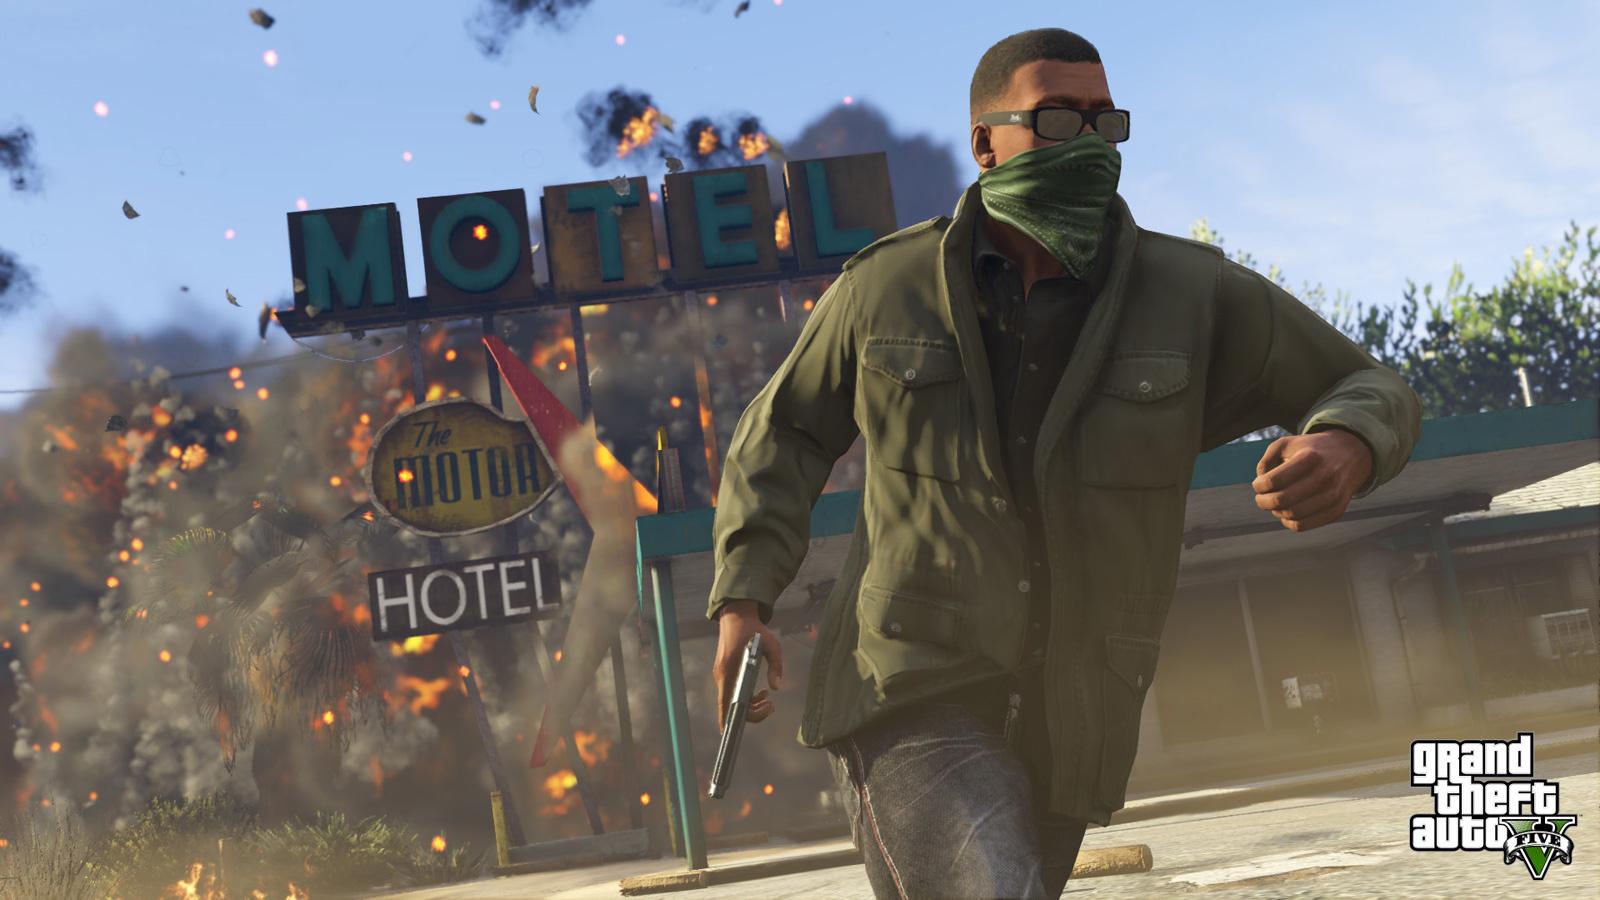 Changes made to Los Santos Customs for combatting GTA Online griefers